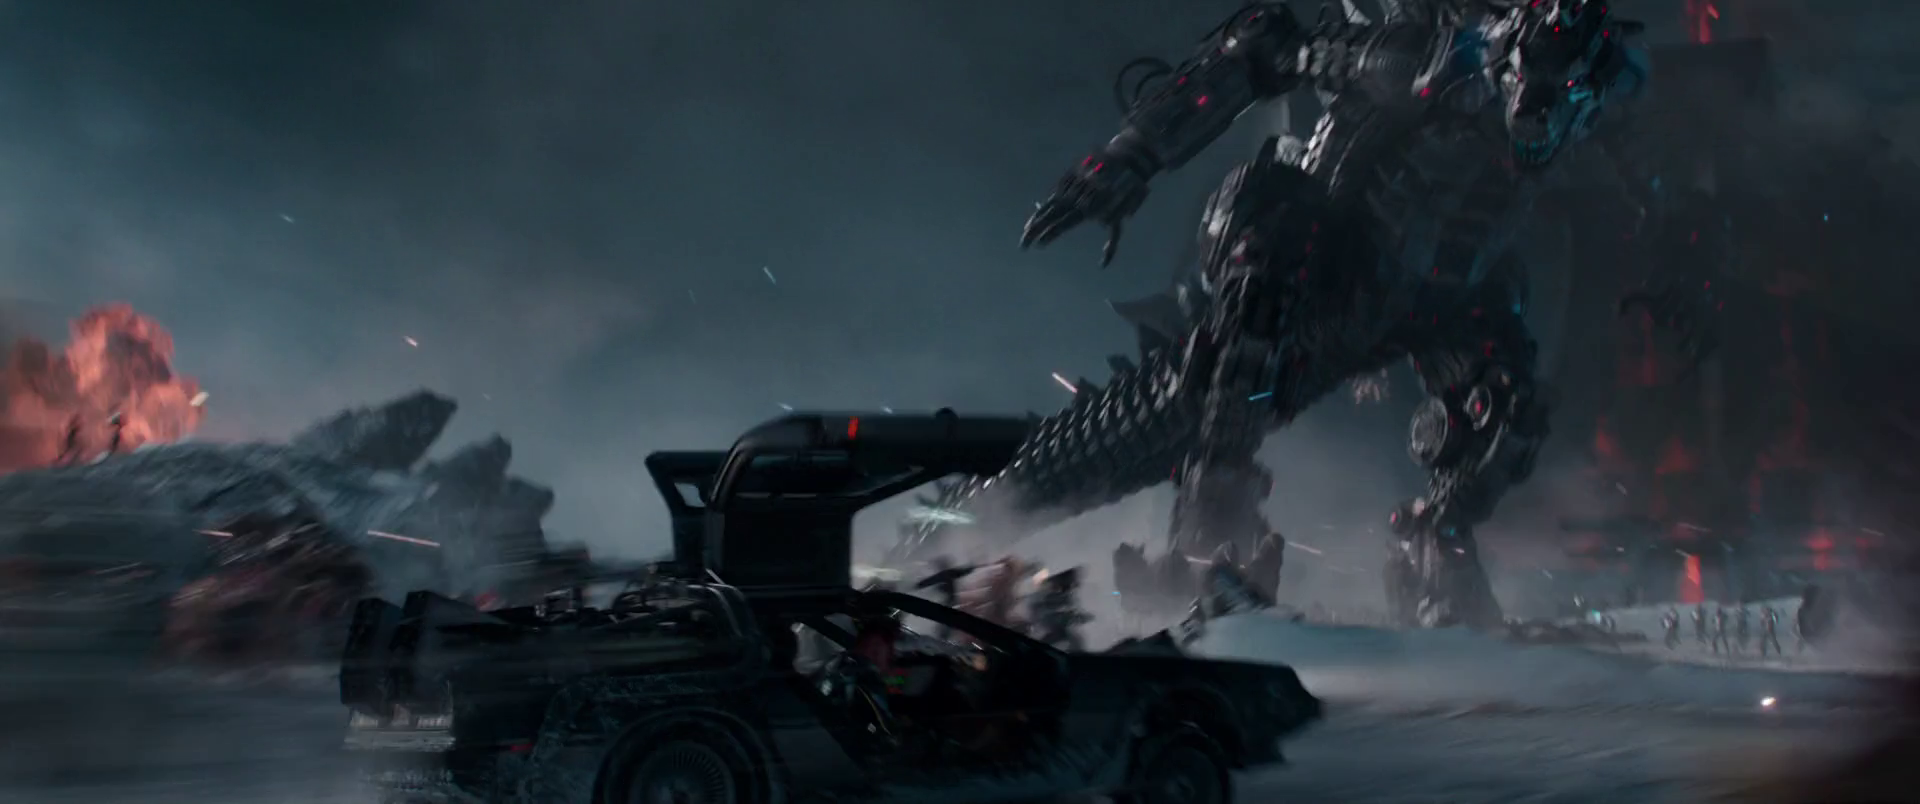 MechaGodzilla Confirmed in Ready Player One, Others Rumored